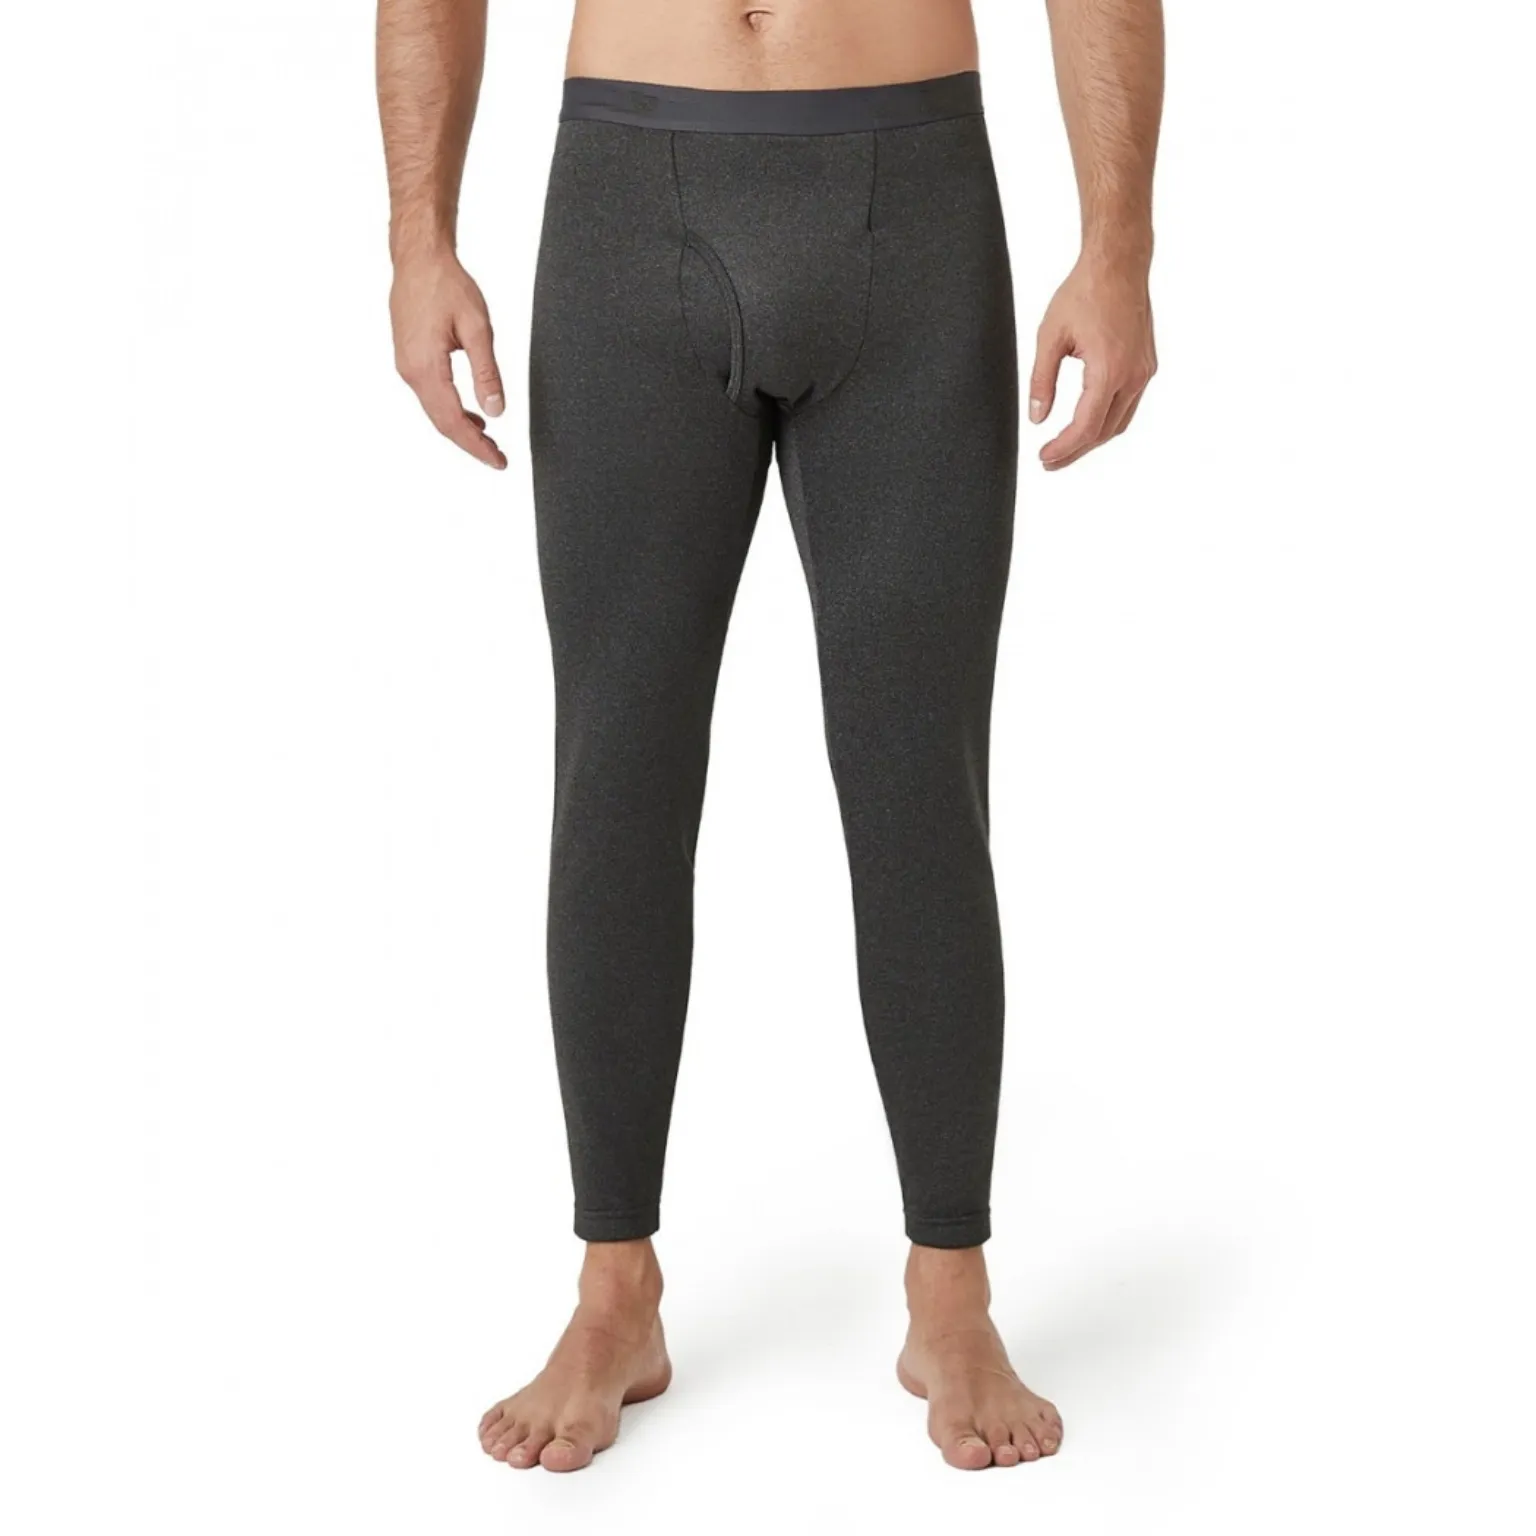 Cotton Long Johns manufacturing with trendy design